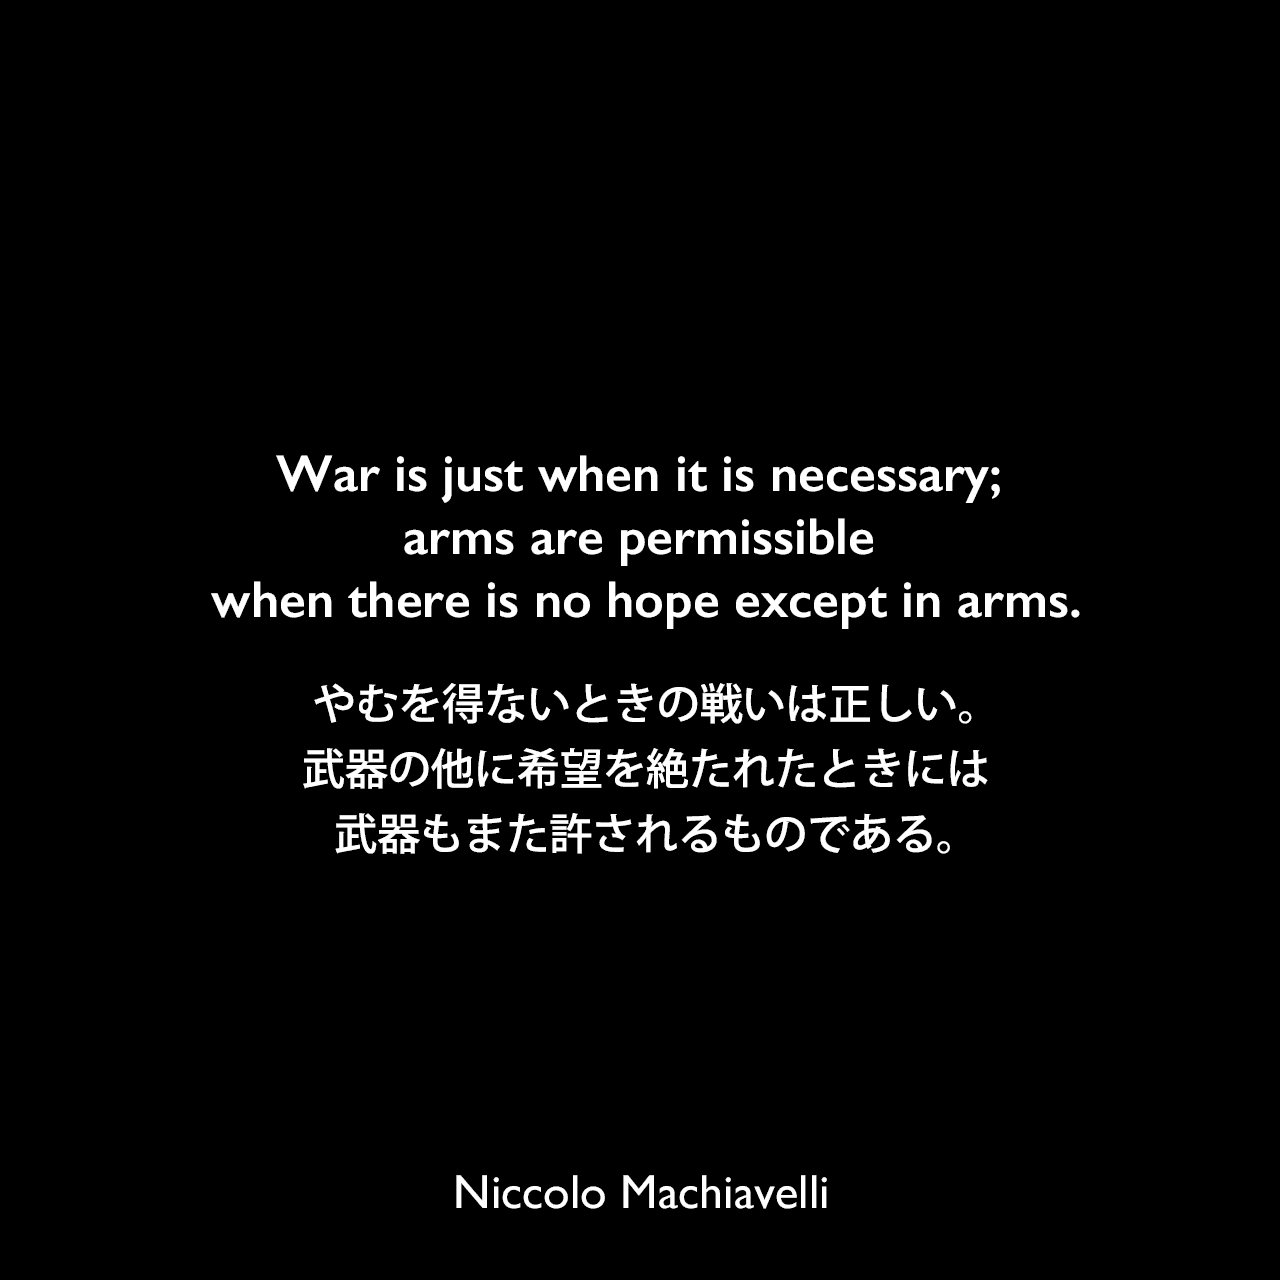 War is just when it is necessary; arms are permissible when there is no hope except in arms.やむを得ないときの戦いは正しい。武器の他に希望を絶たれたときには、武器もまた許されるものである。Niccolo Machiavelli